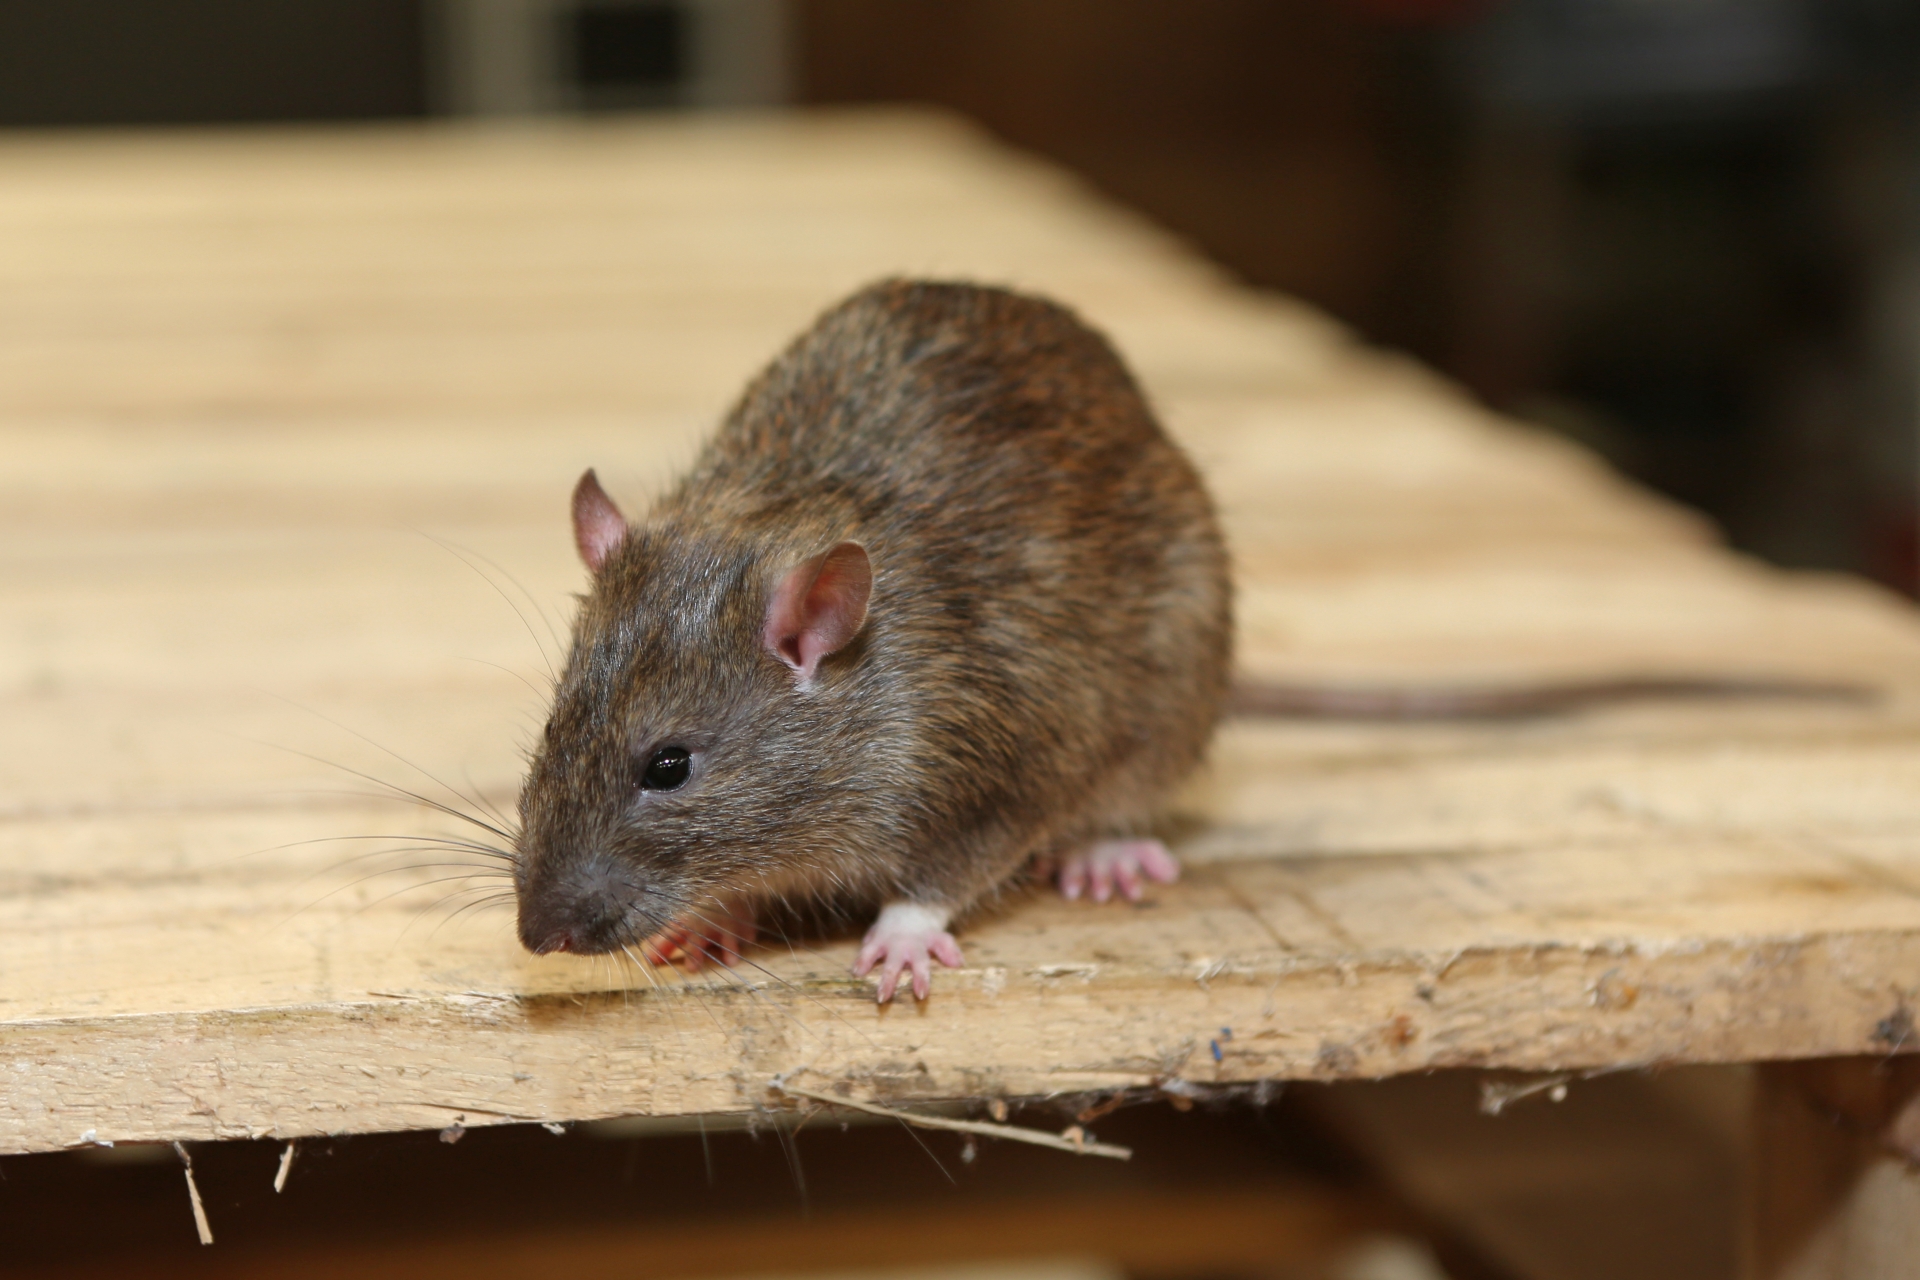 Rat Control, Pest Control in Addlestone, New Haw, Woodham, KT15. Call Now 020 8166 9746